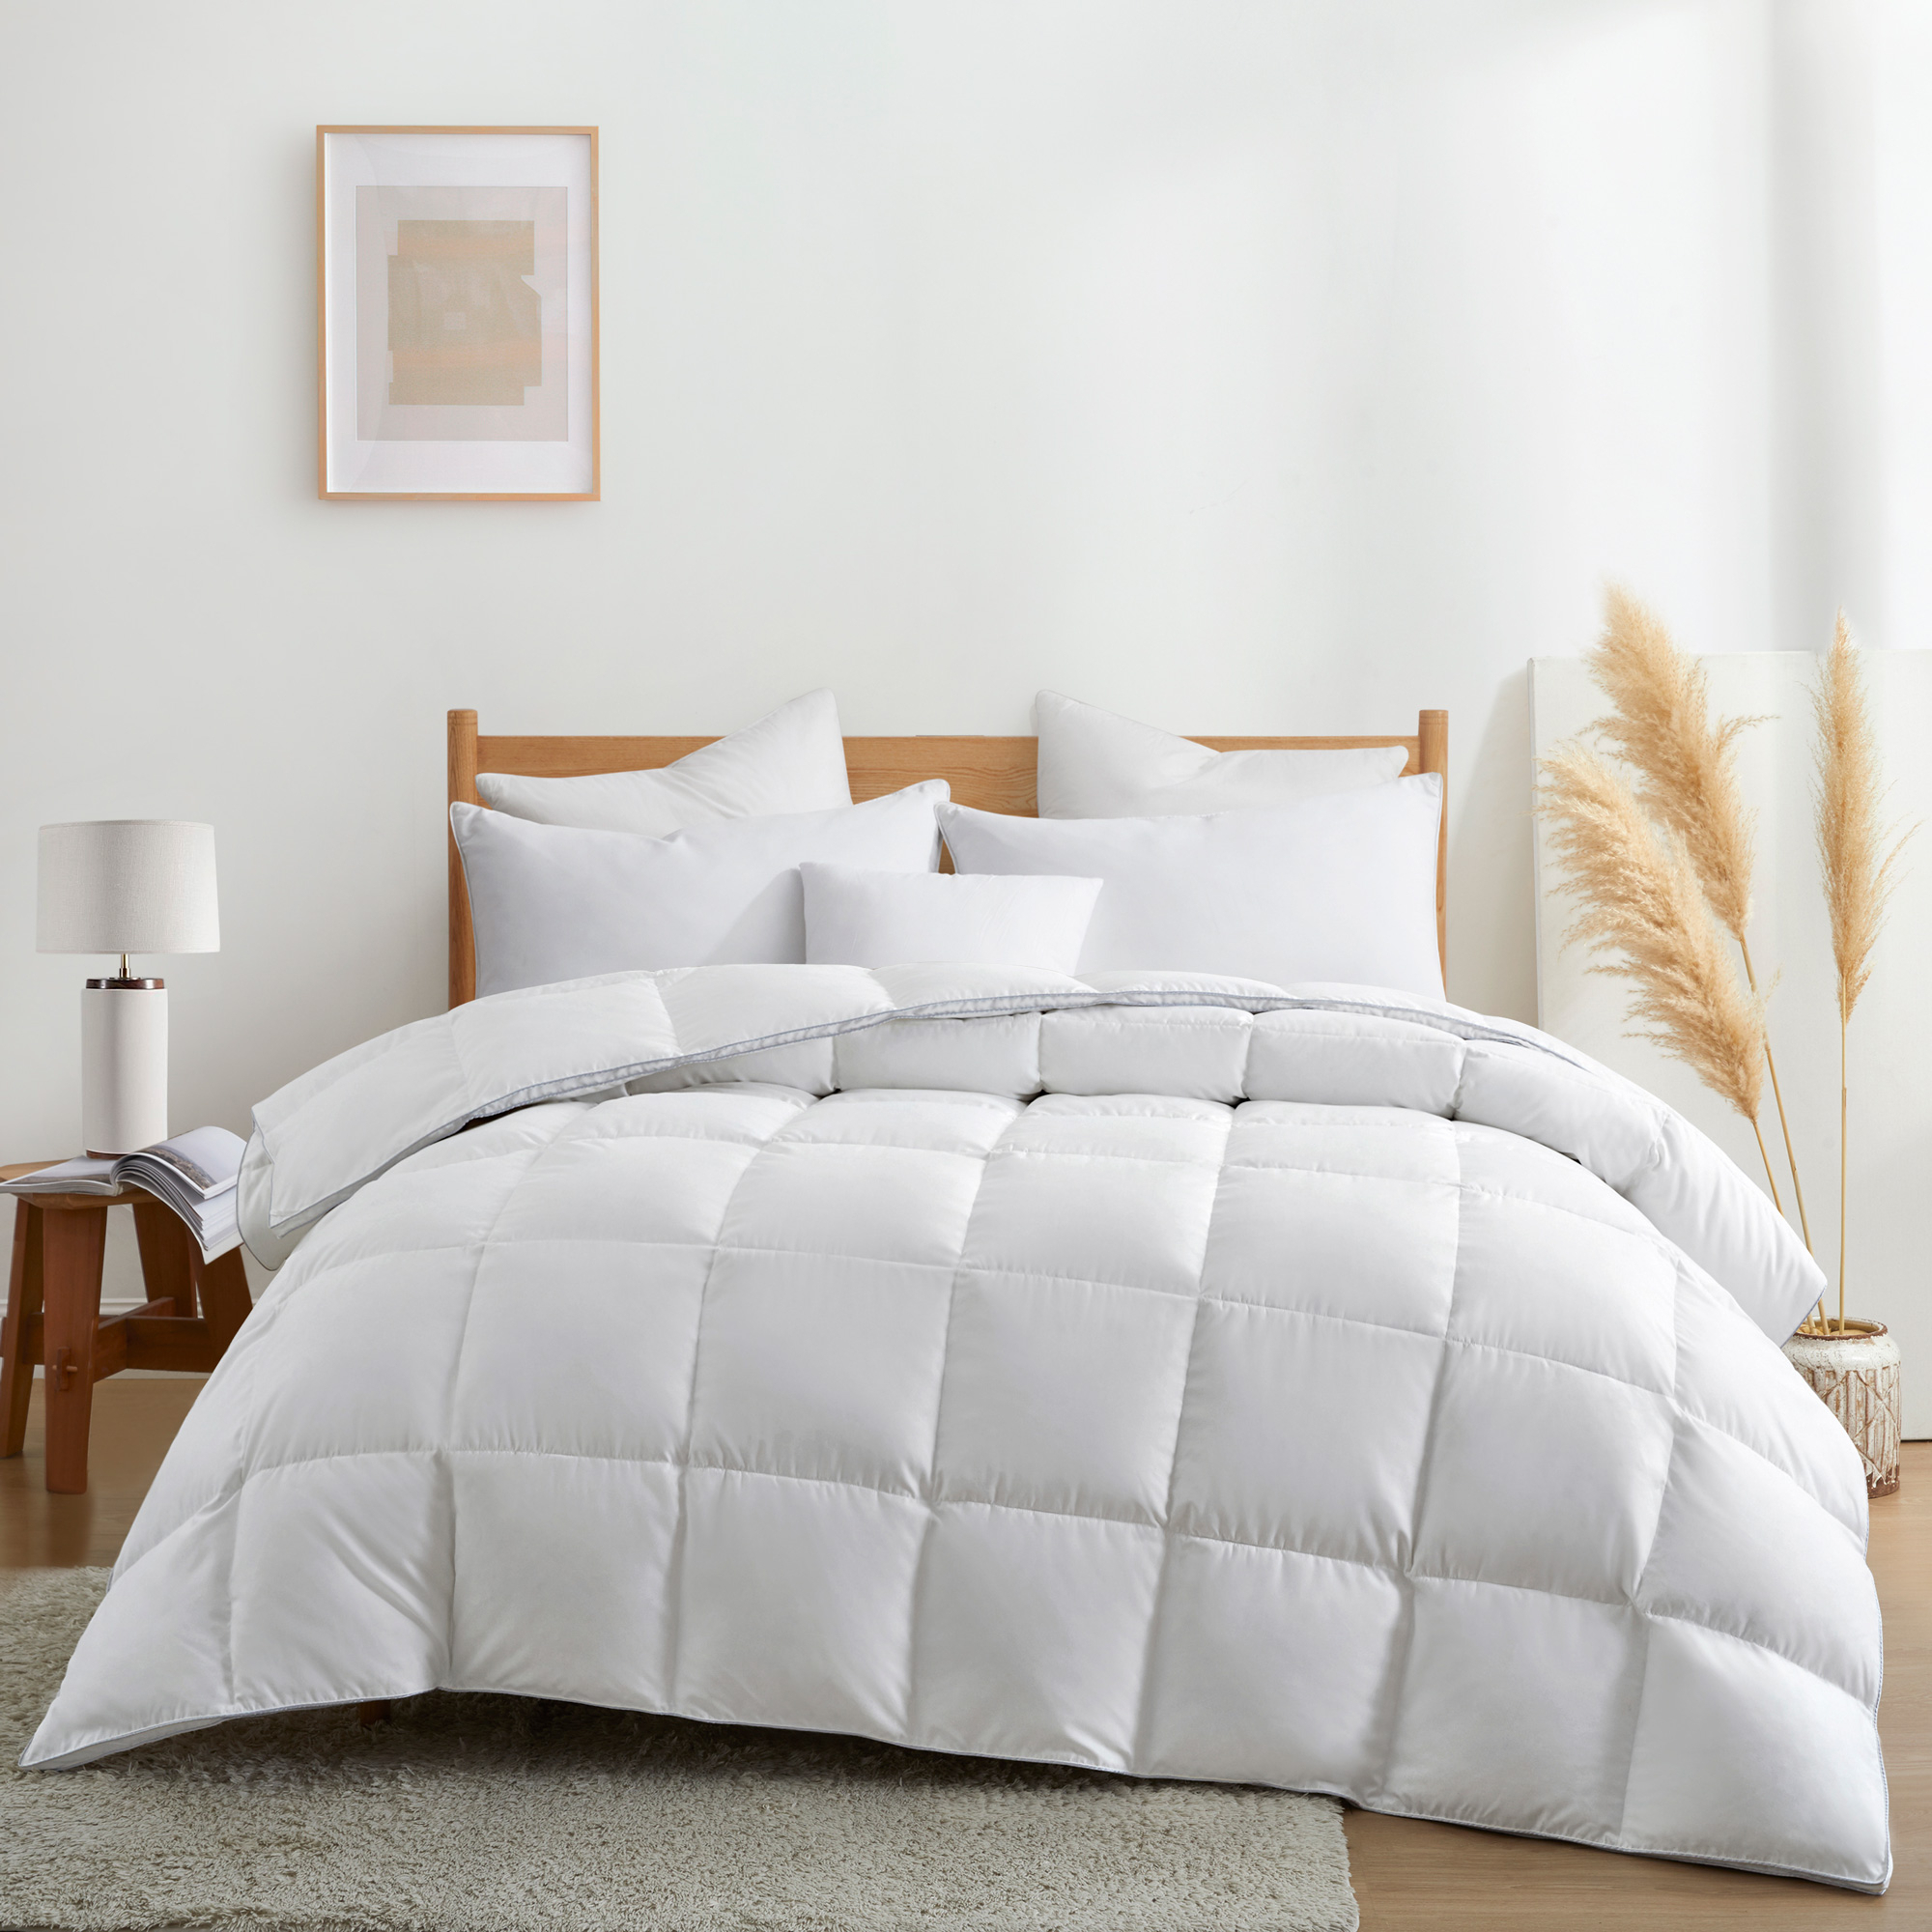 Luxurious Medium Weight White Goose Down Feathers Fiber Comforter, For All-Season Weather - Full/Queen